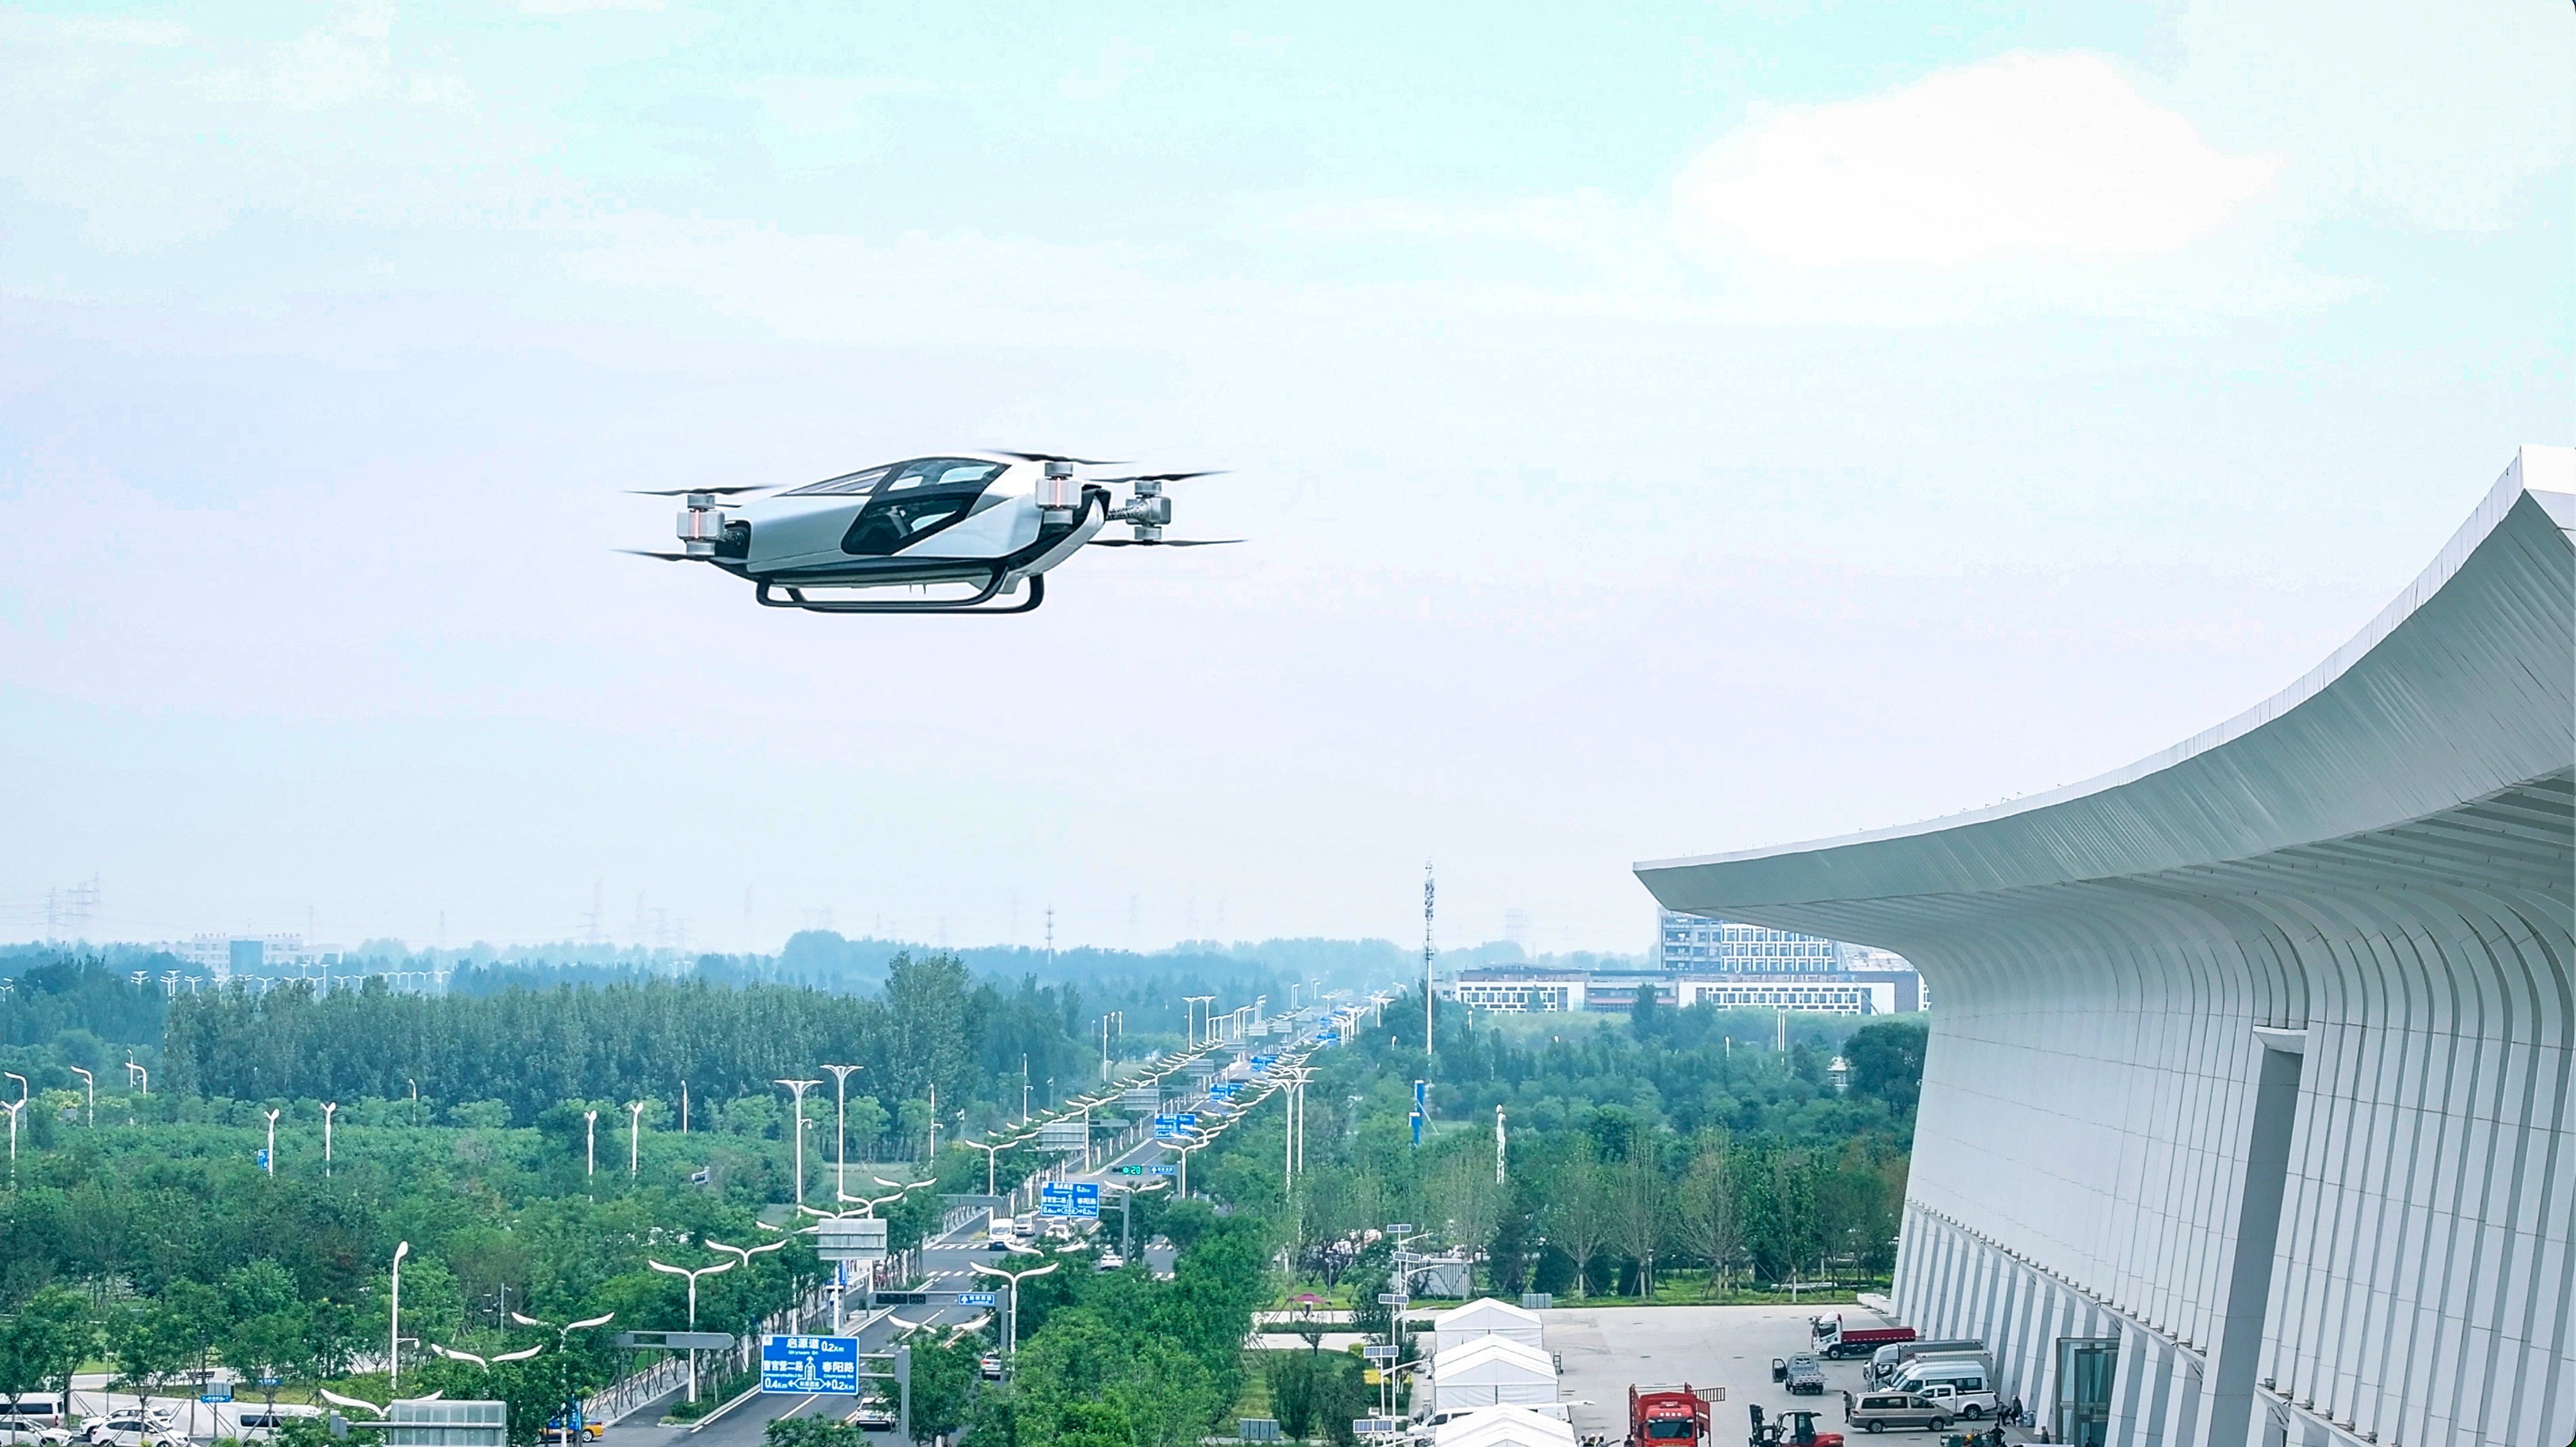 X2, a flying car made by Xpeng affiliate AeroHT, has completed its maiden flight at Beijing Daxing International Airport. Photo: Handout